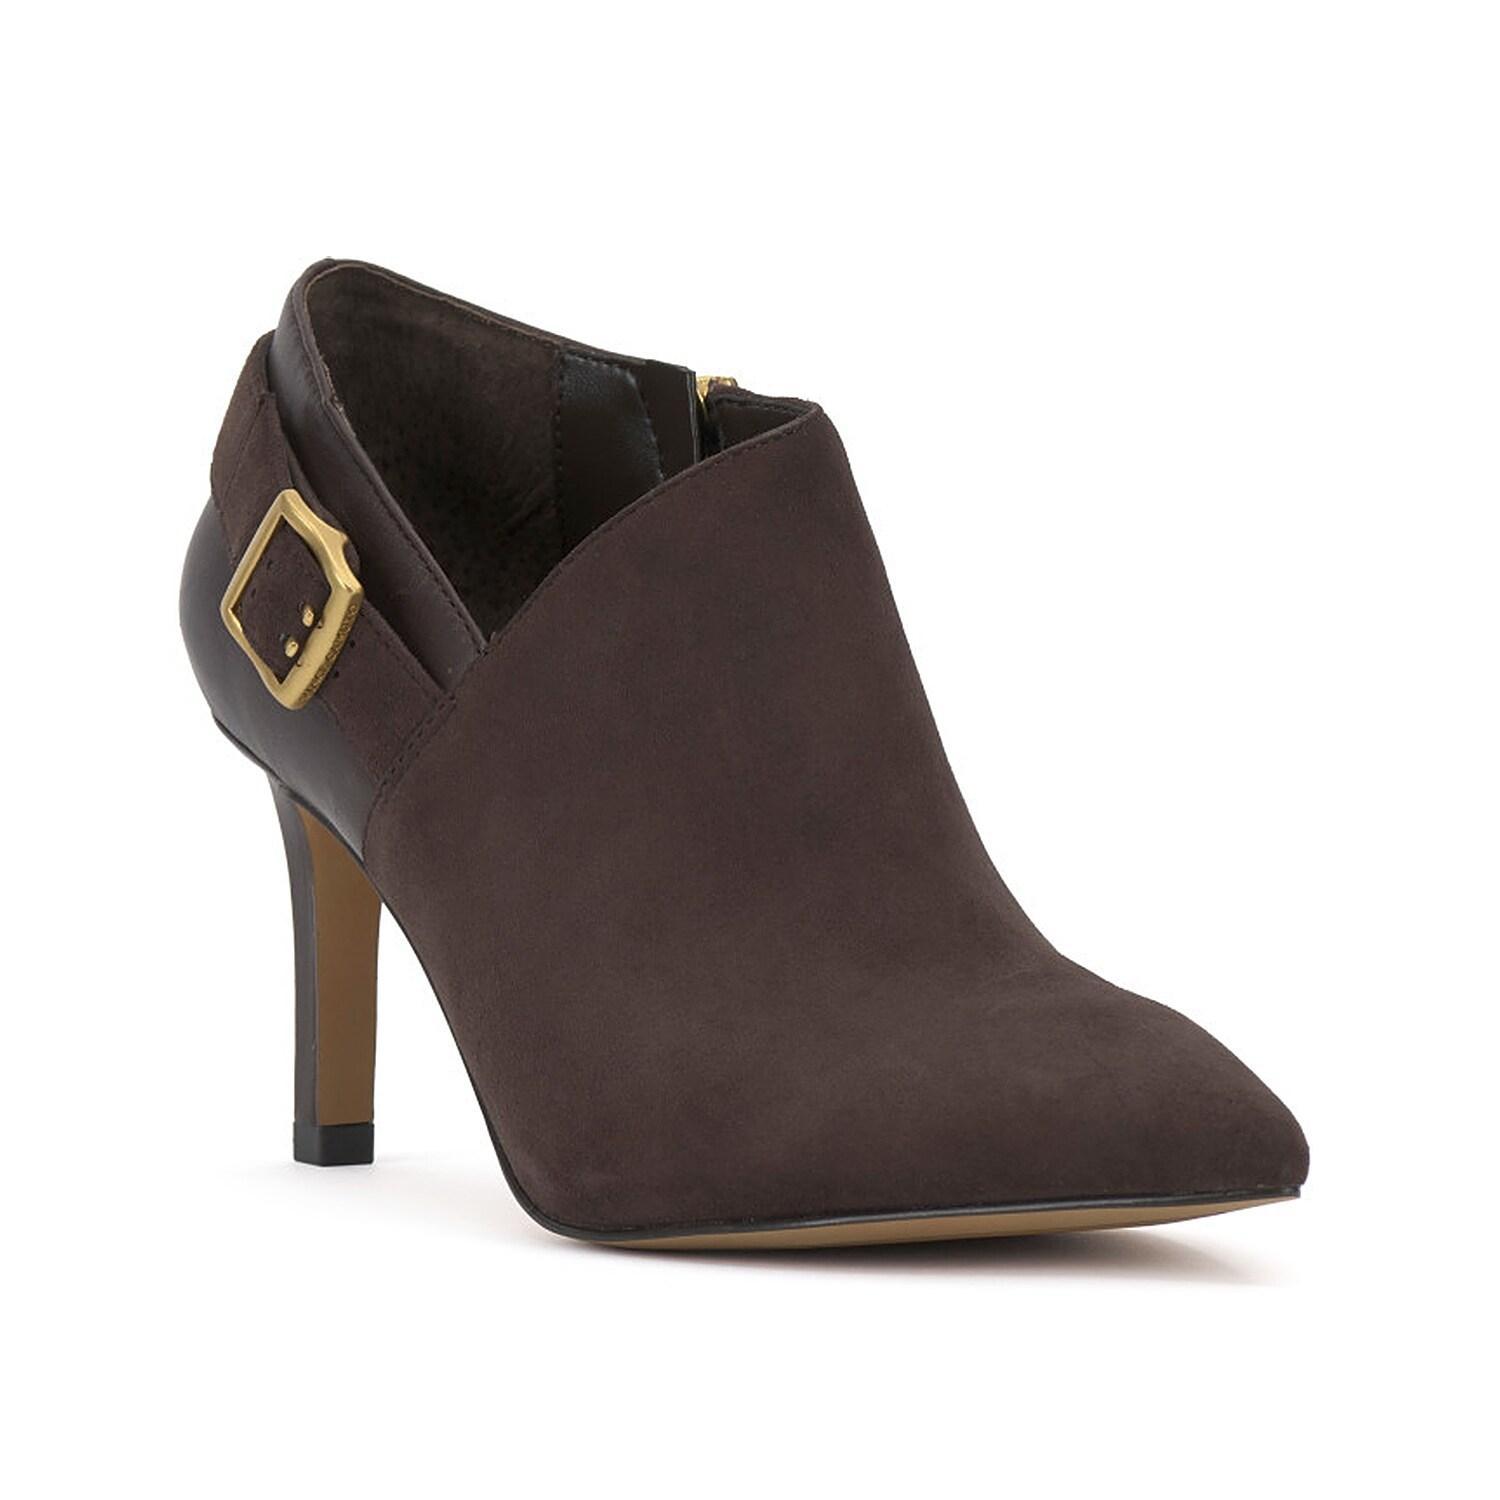 Vince Camuto Kreitha Pointed Toe Bootie Product Image